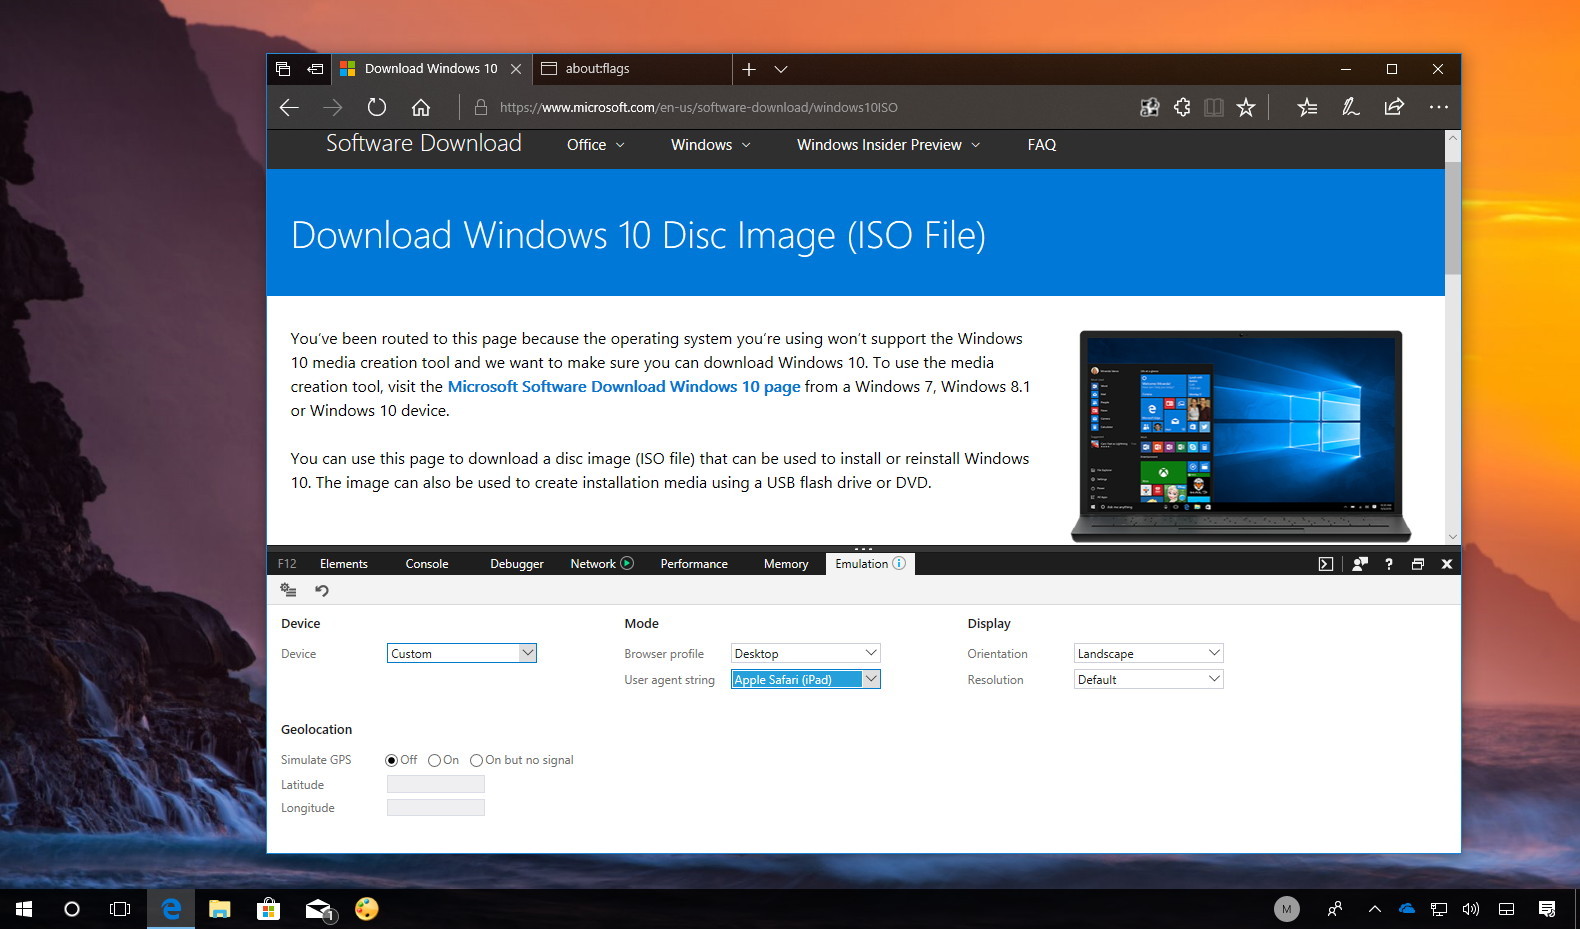 Download Windows 10 April 2018 Update (Version 1803) Iso File - Pureinfotech